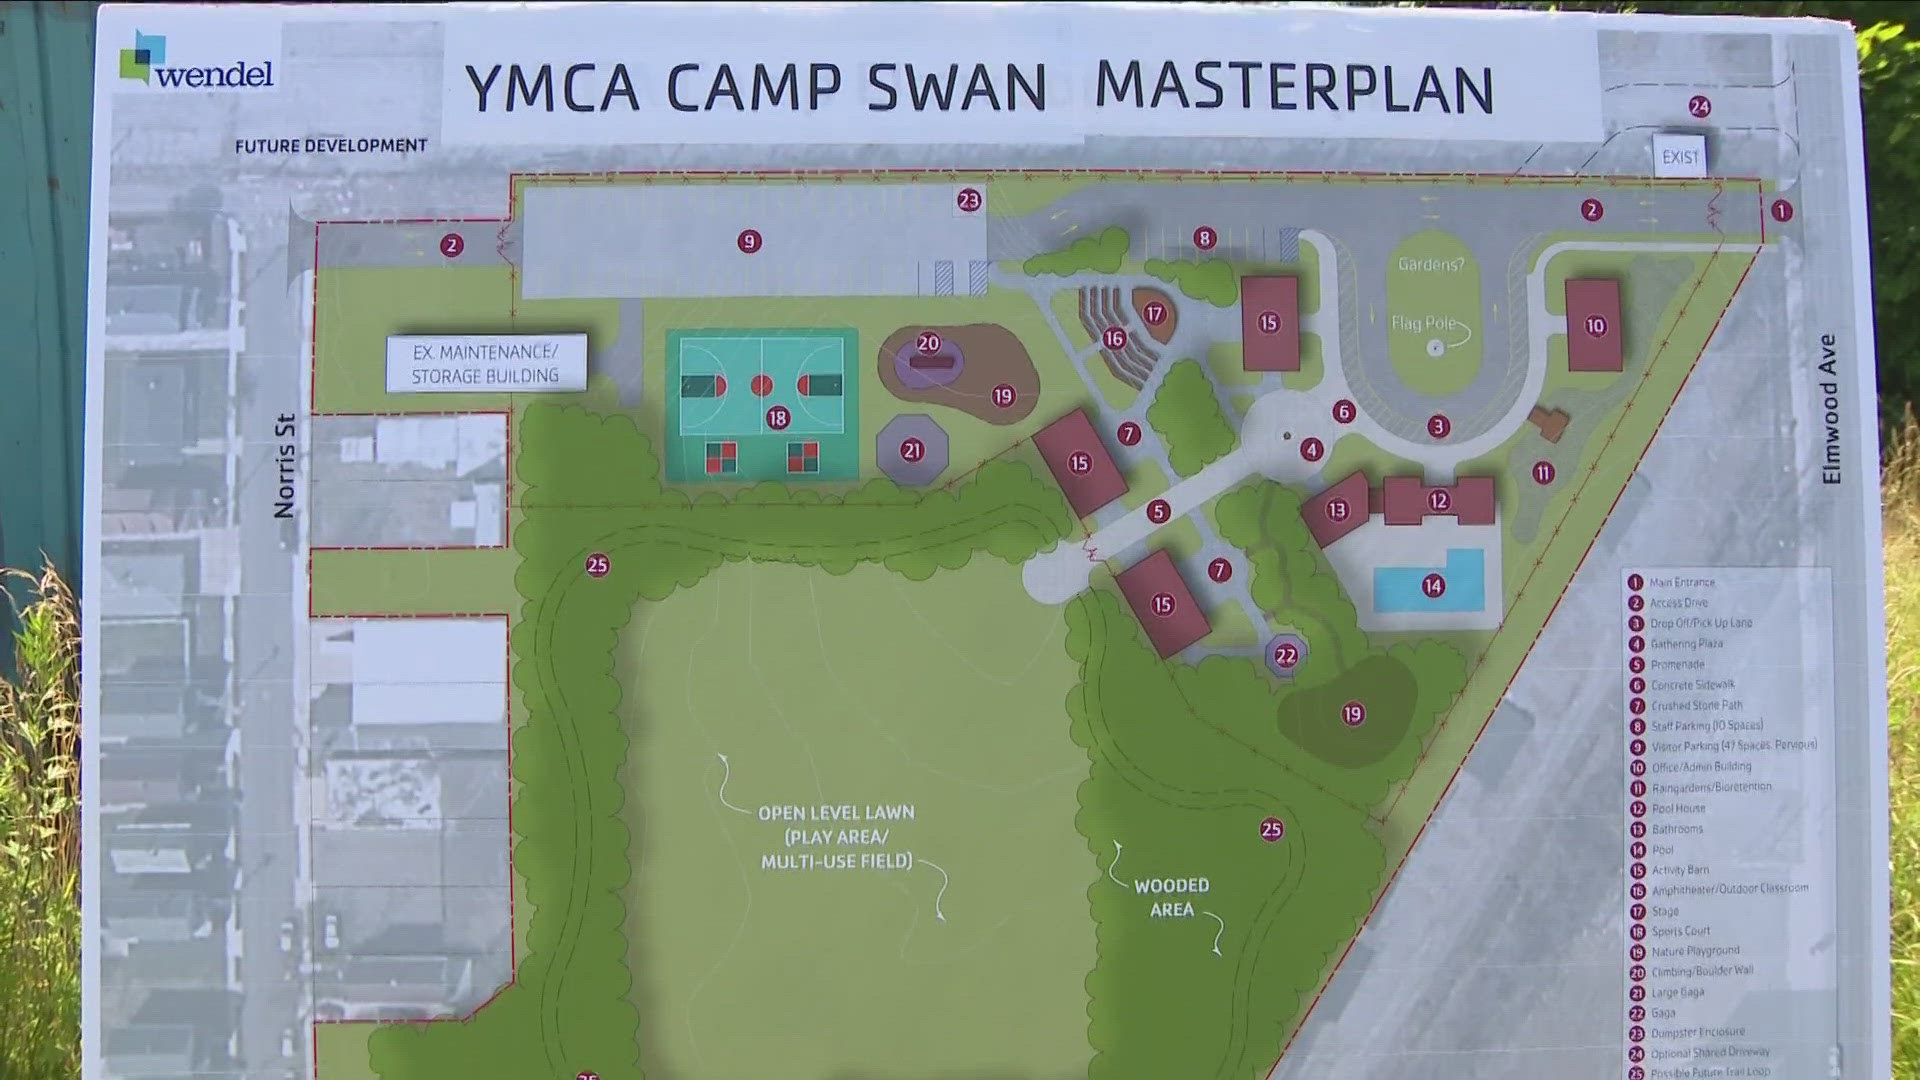 A plan to build a new summer camp and community event space... called YMCA Camp Swan...